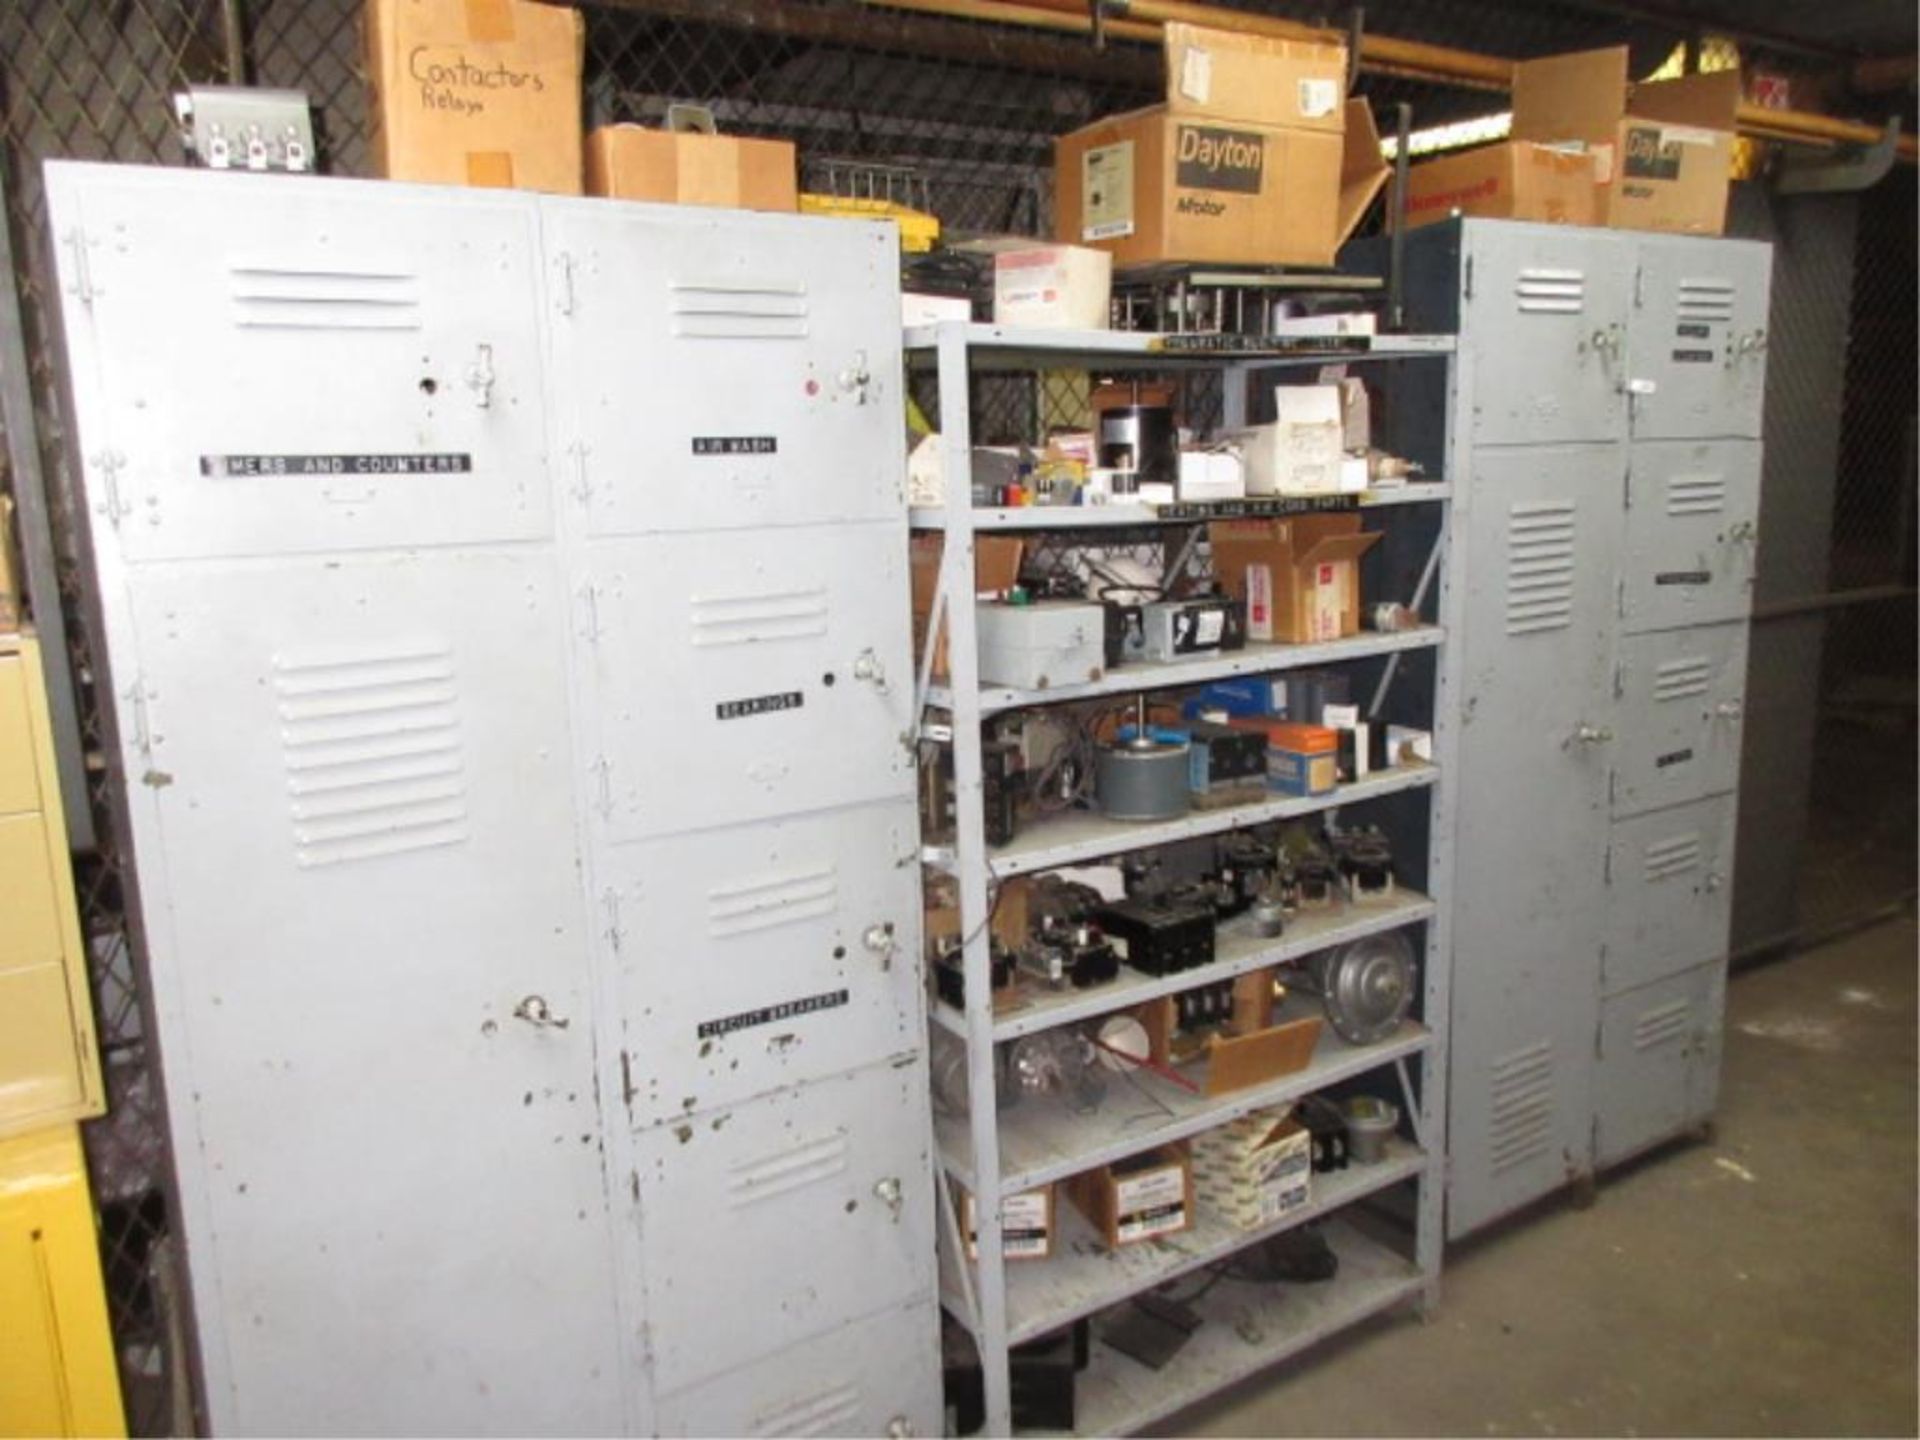 Lot Contents of Electrical Shop, includes cabinets, contents, conduit, etc. in three rooms. - Image 6 of 17